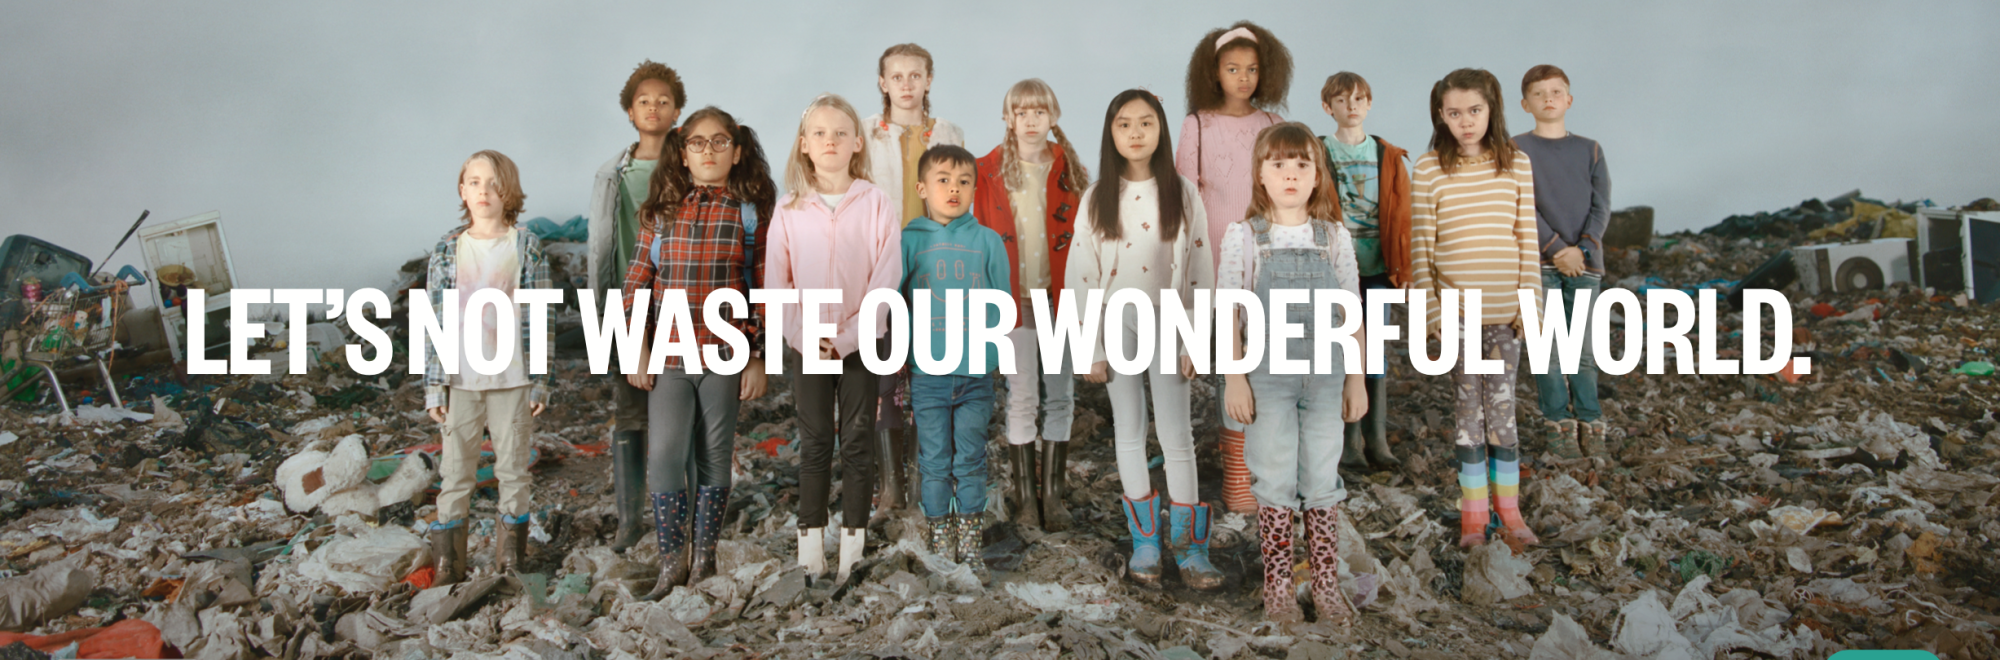 OLIO has created an ad to raise awareness of the colossal scale of the UK household waste problem